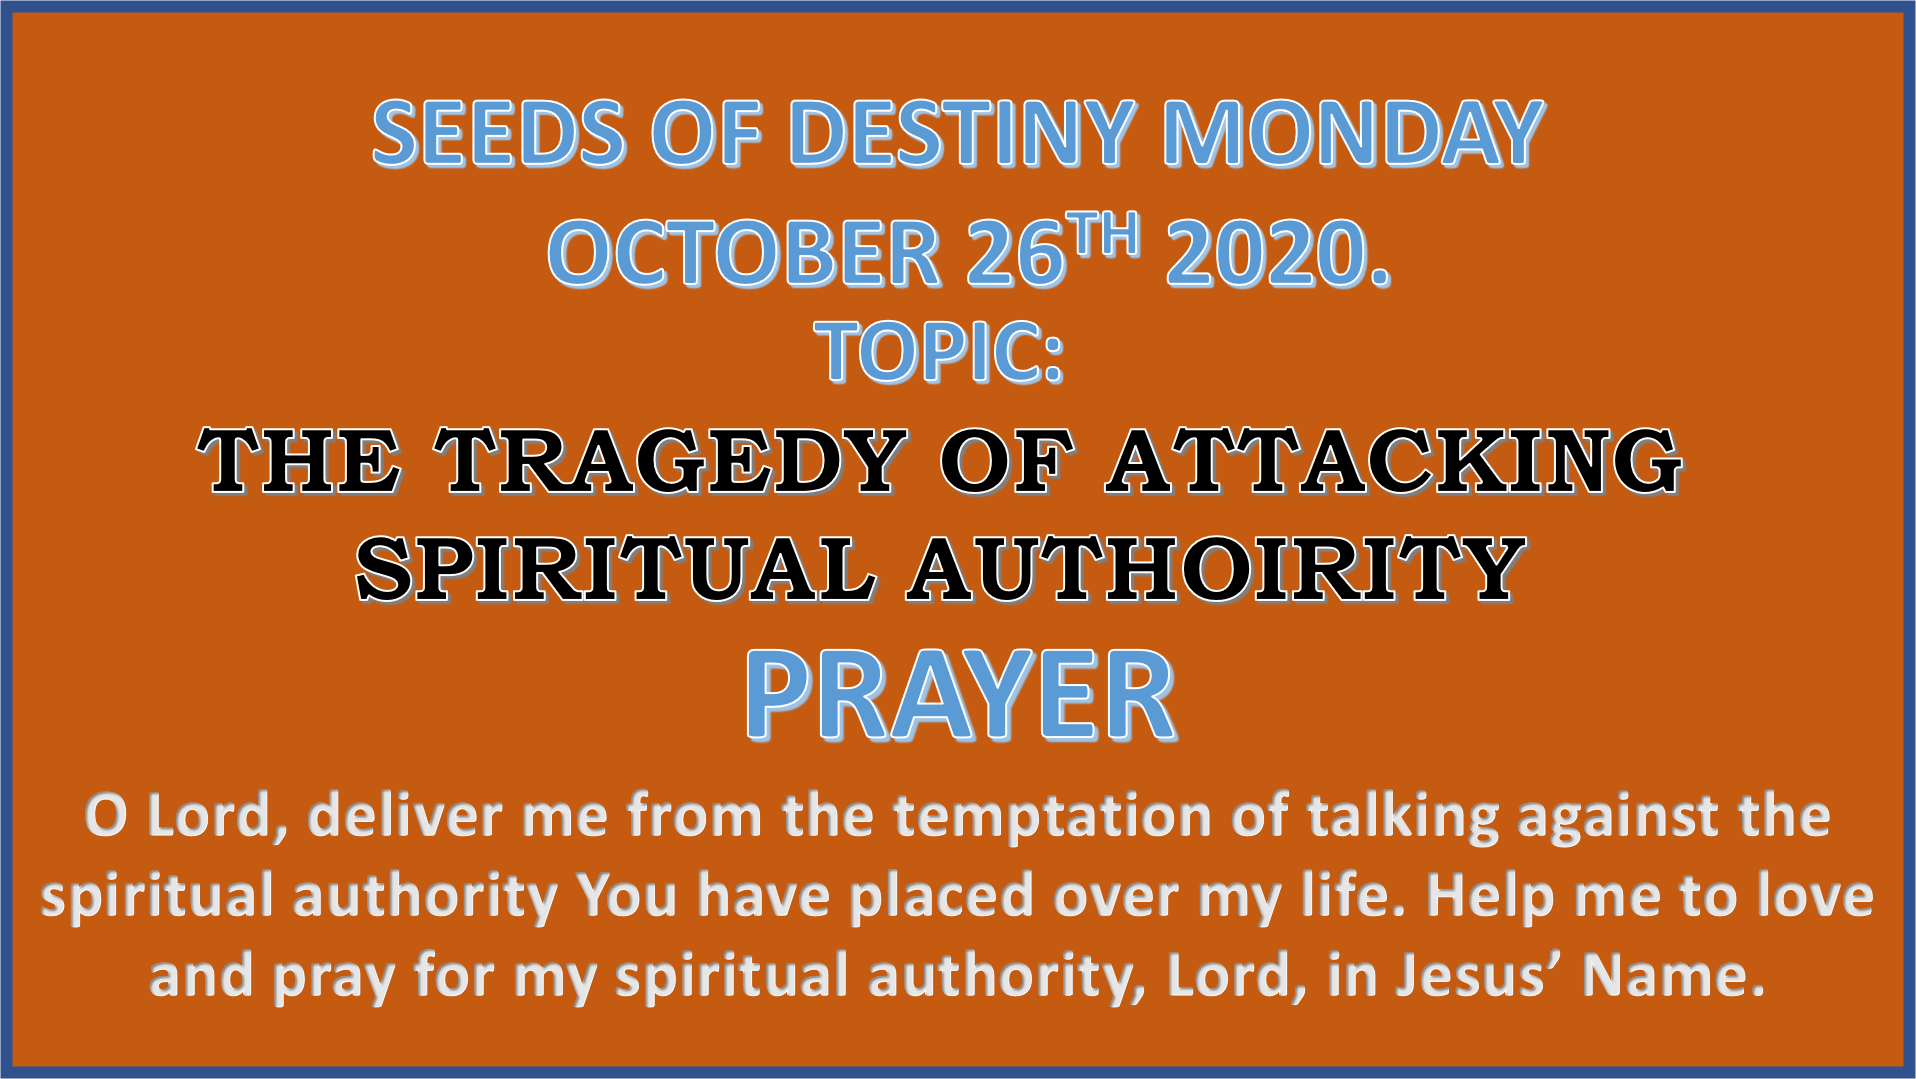 Seeds of Destiny Monday 26th October 2020 by Dr Paul Enenche